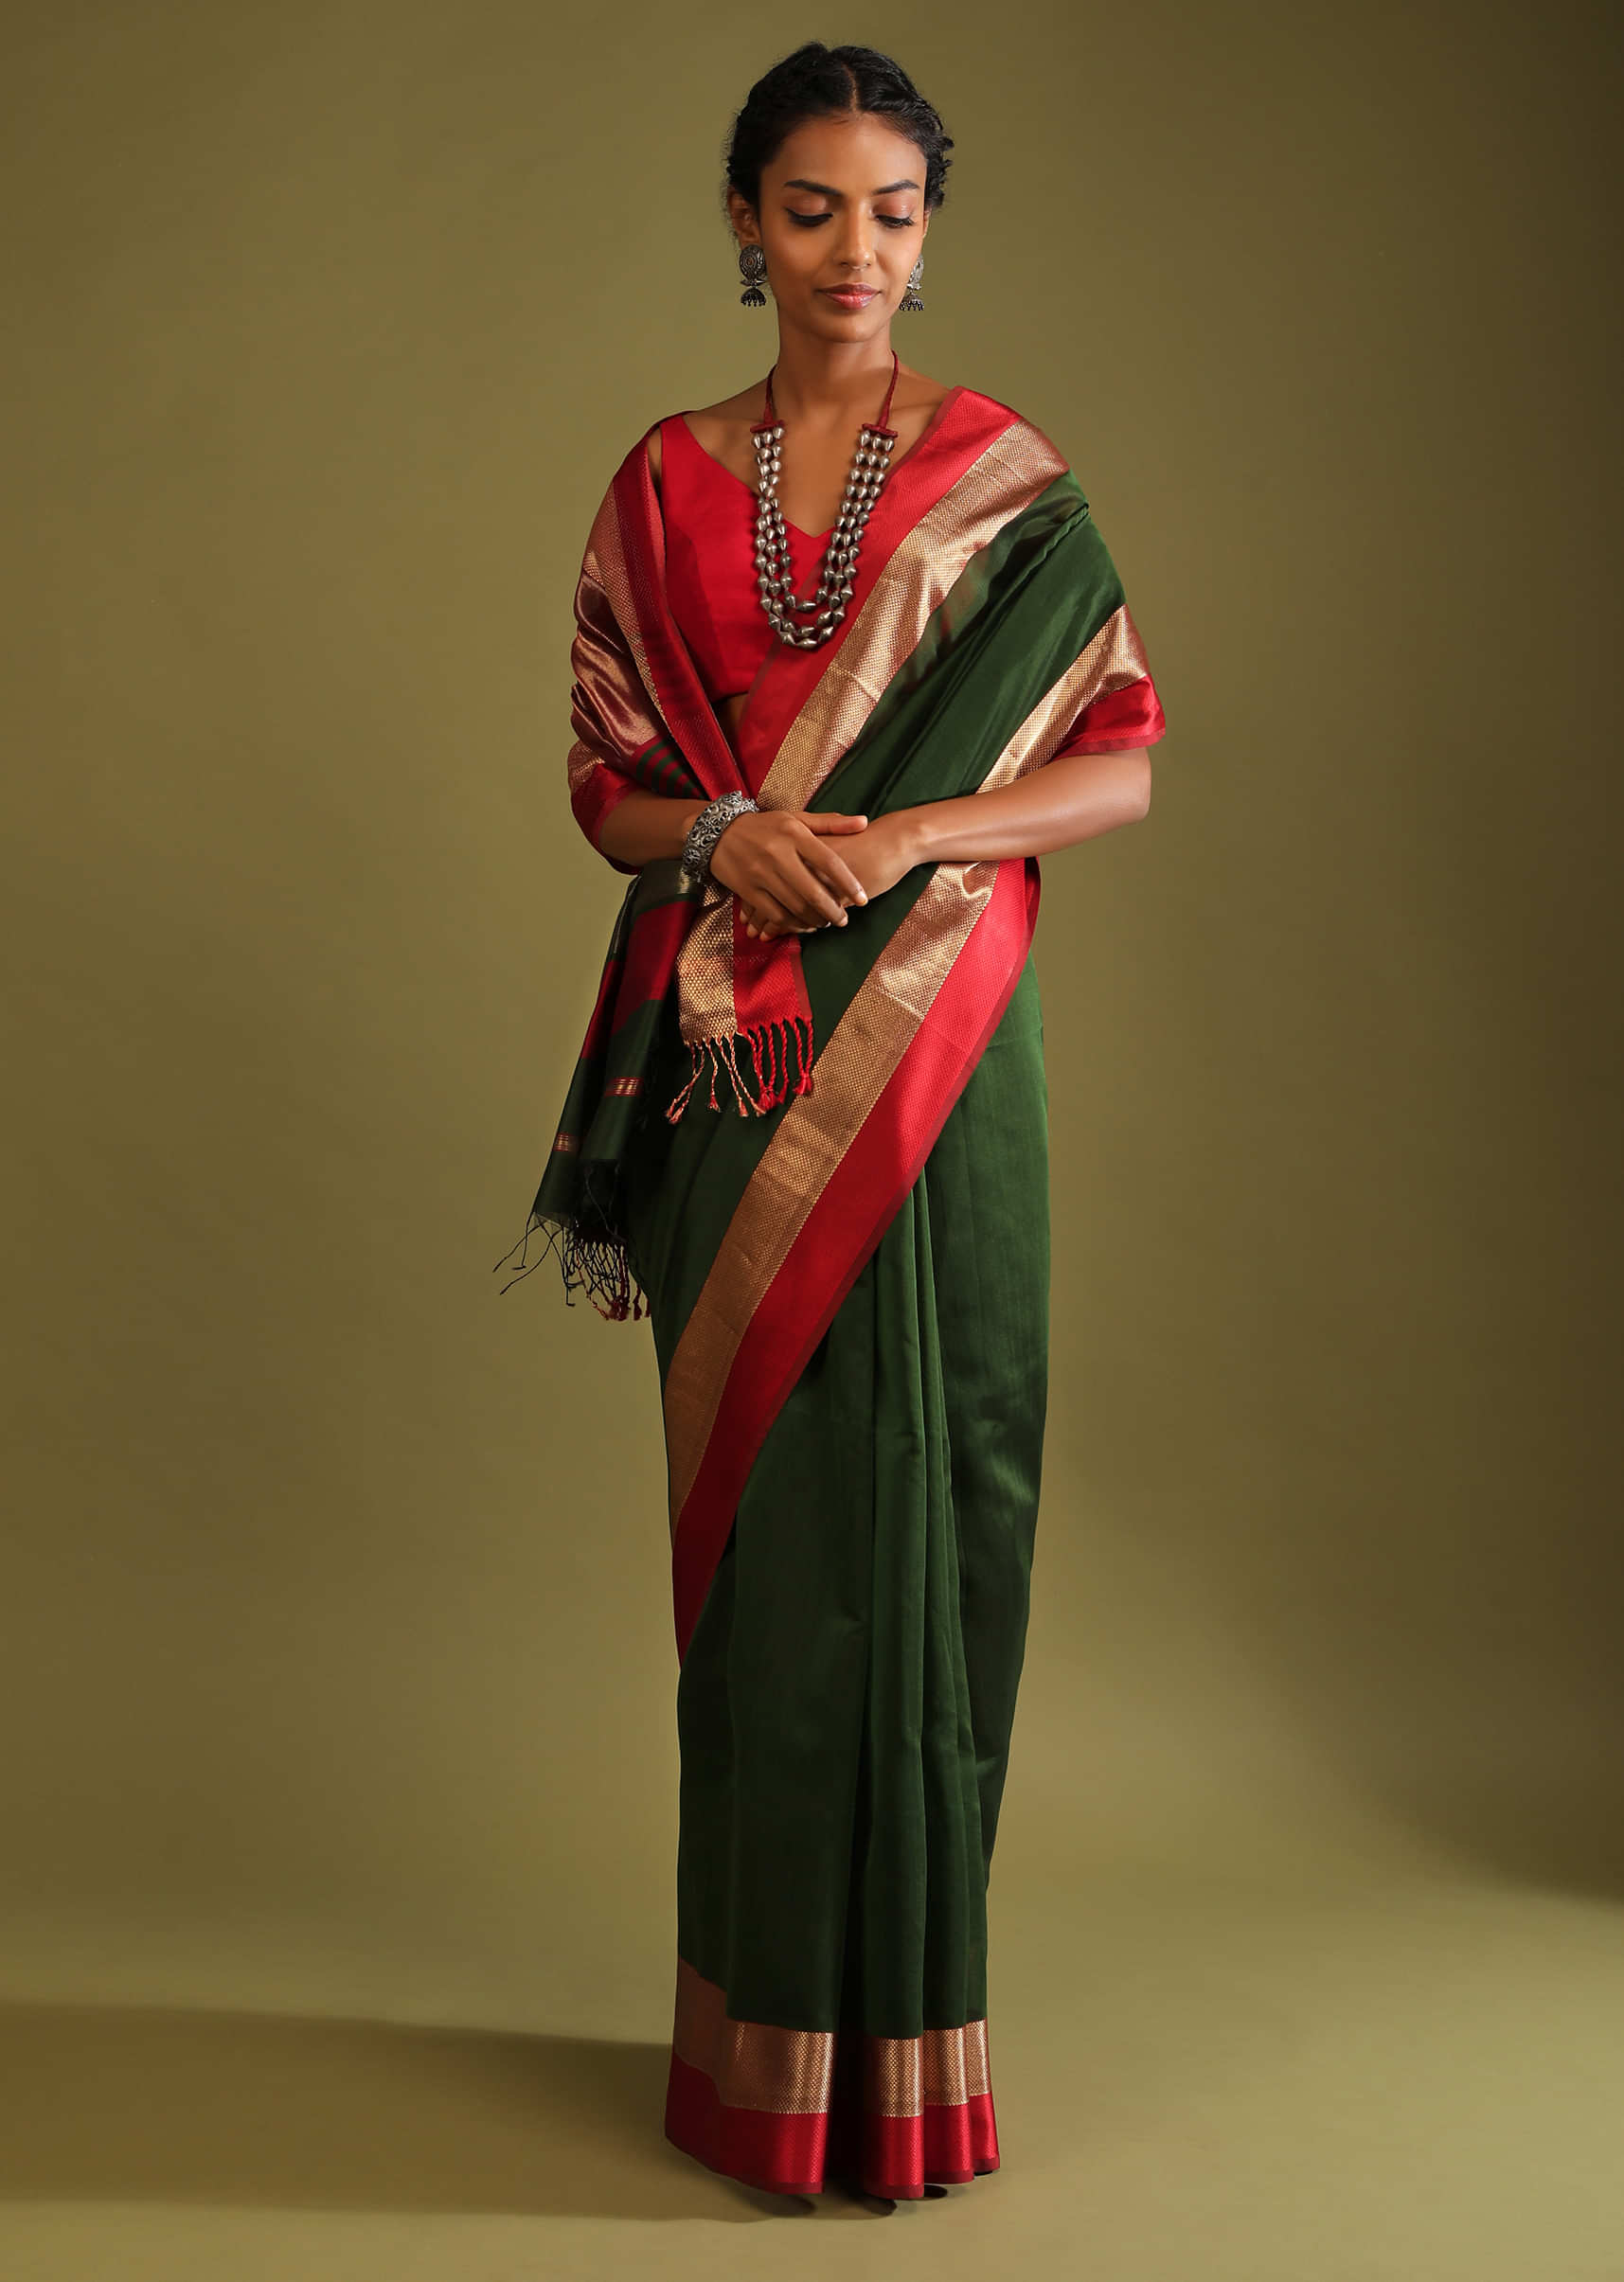 Cypress Green Saree In Tussar Silk With Gold And Red Woven Border And Striped Pallu Design  